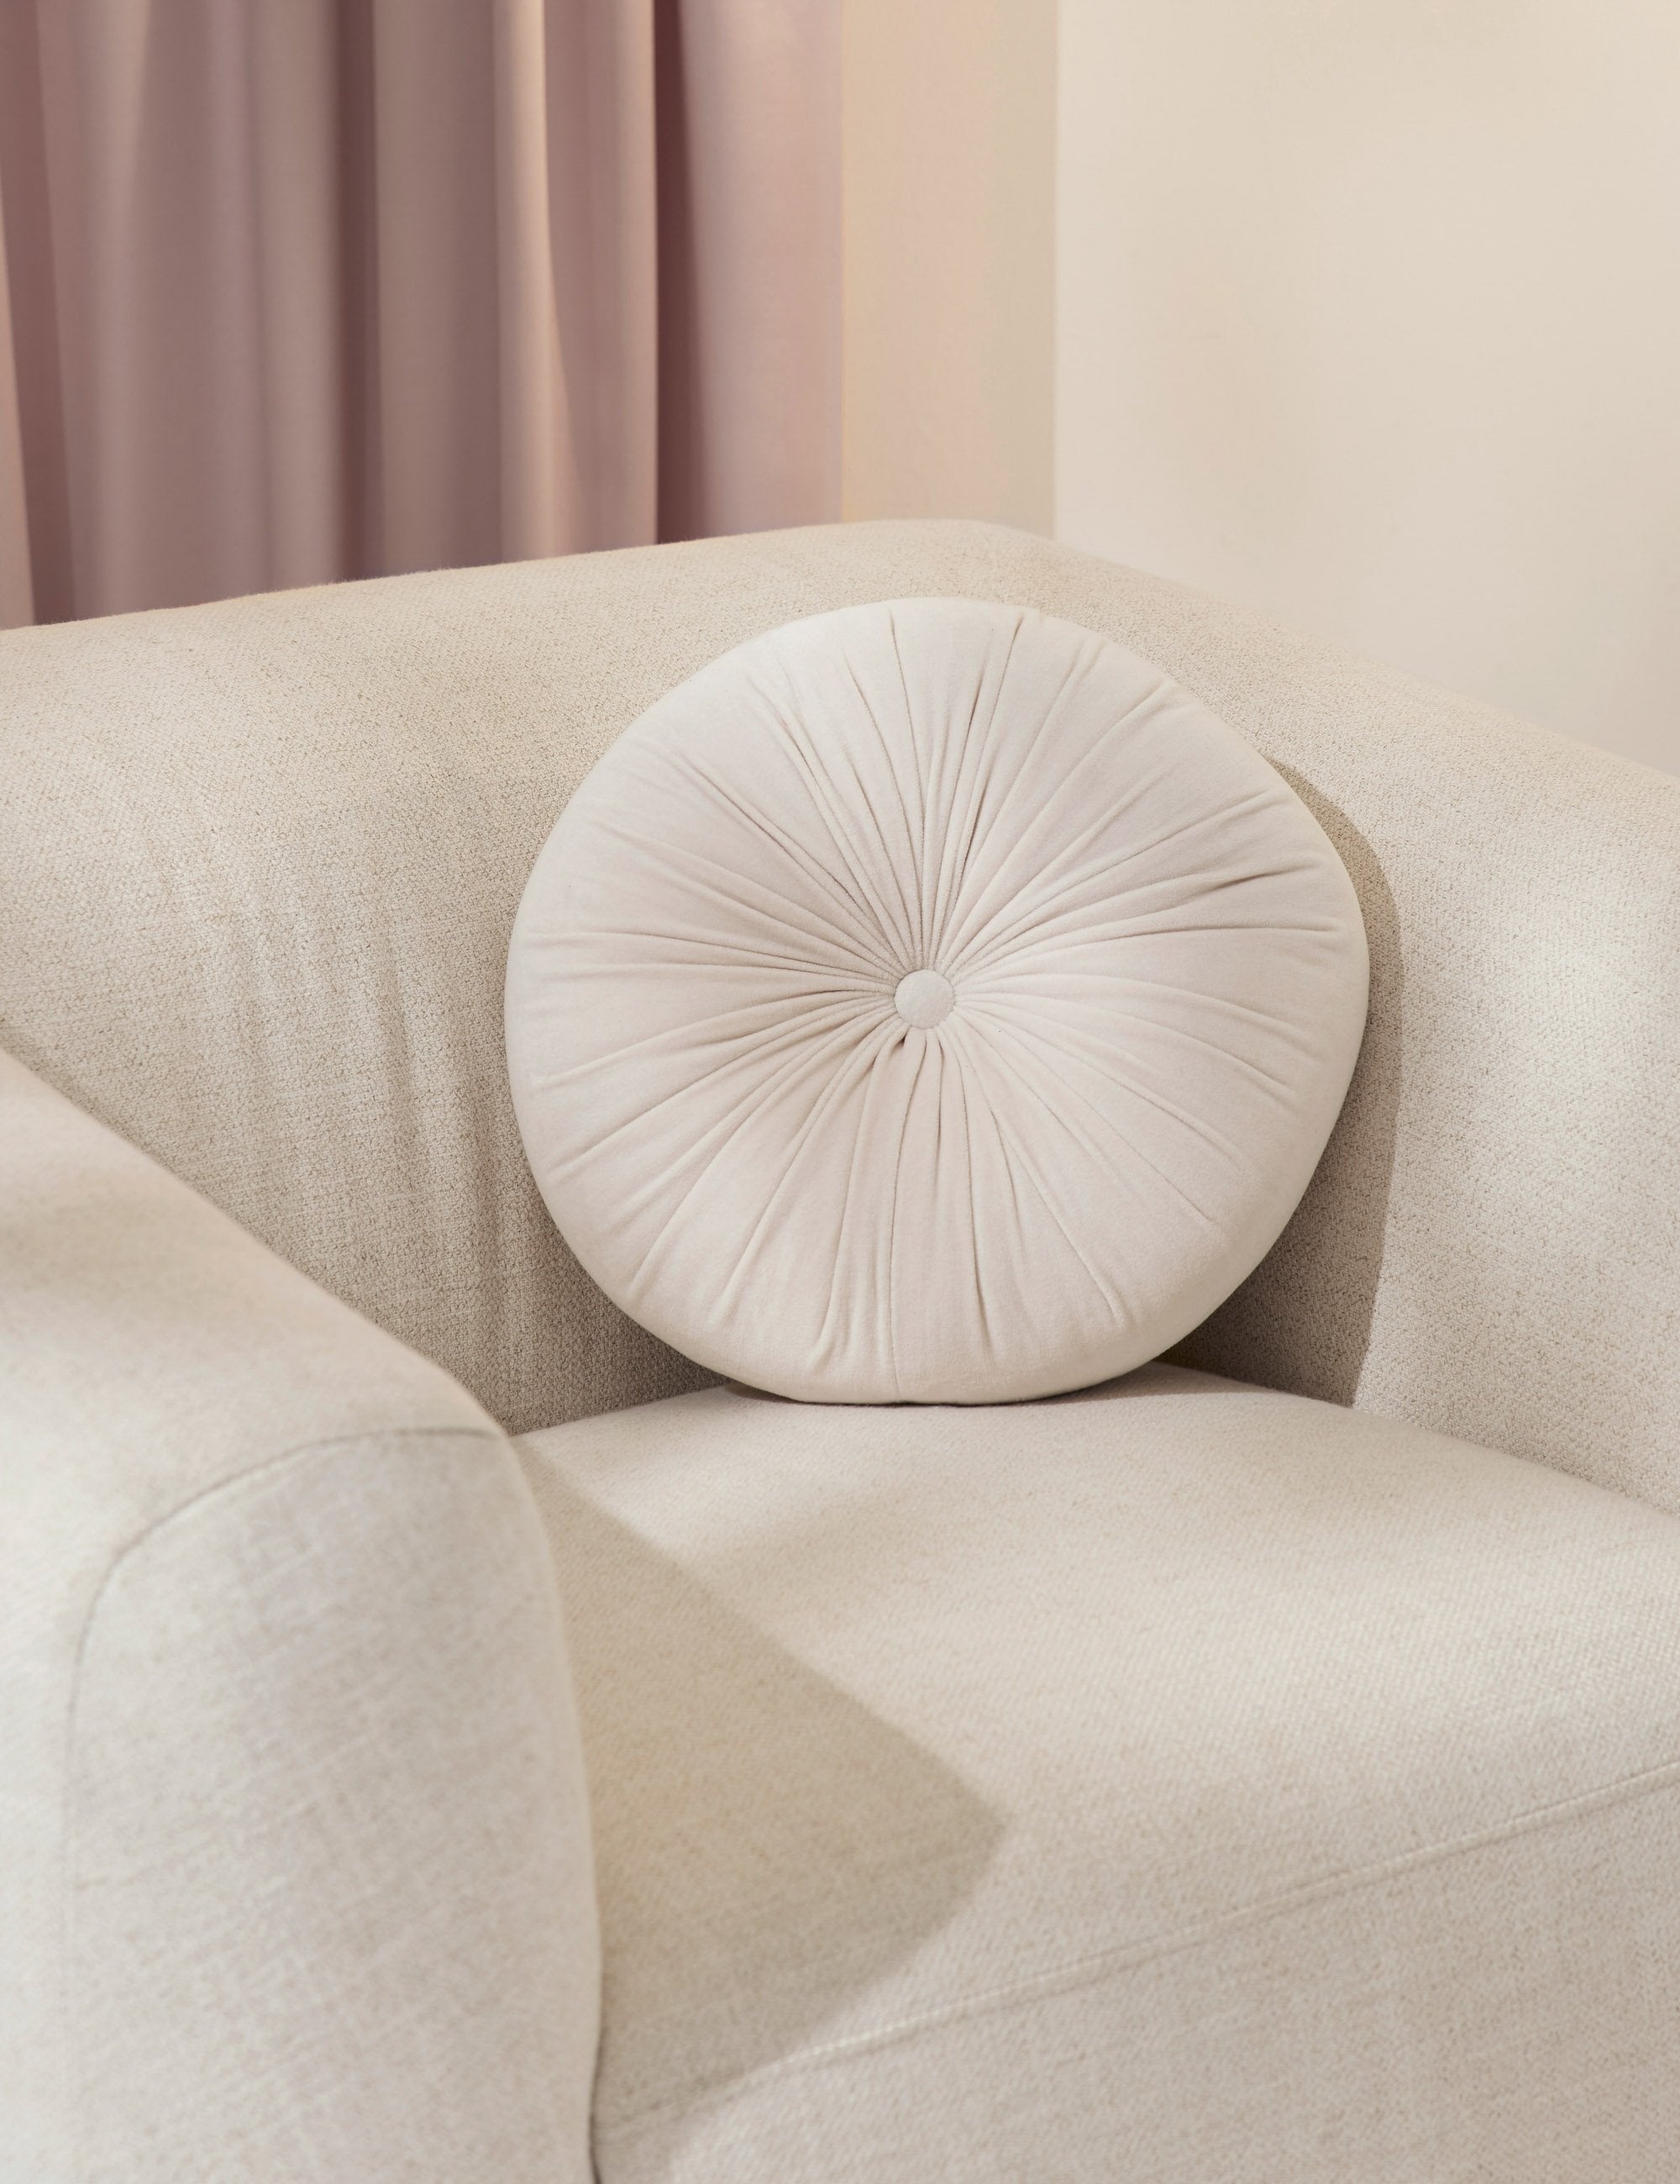 The Monroe oyster white velvet round pillow sits on a white accent chair